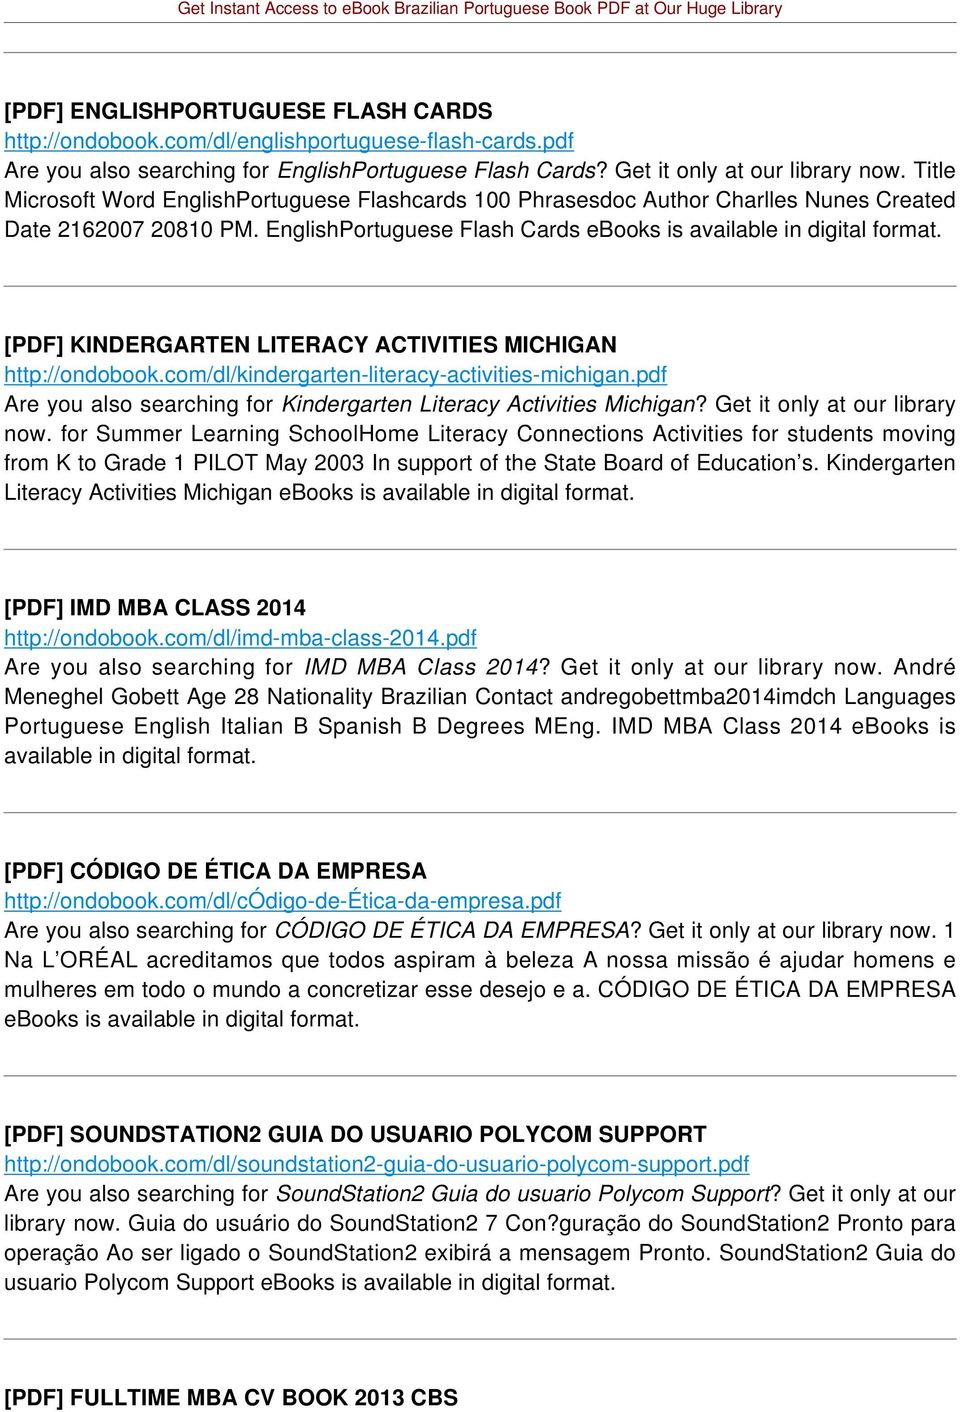 [PDF] KINDERGARTEN LITERACY ACTIVITIES MICHIGAN http://ondobook.com/dl/kindergarten-literacy-activities-michigan.pdf Are you also searching for Kindergarten Literacy Activities Michigan?